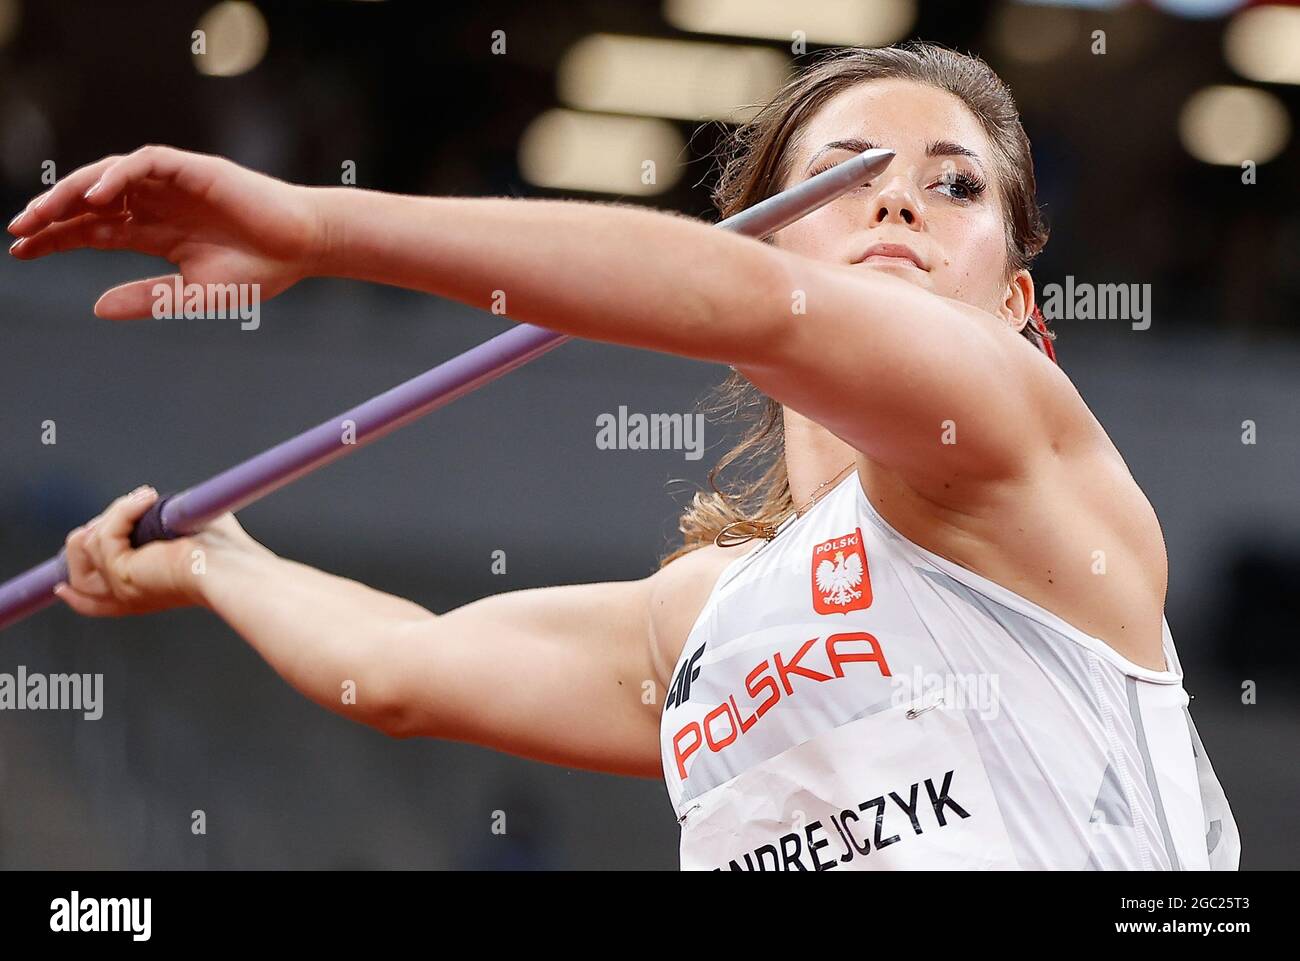 Tokyo, Japan. 6th Aug, 2021. Maria Andrejczyk of Poland competes during the women's javelin throw final at Tokyo 2020 Olympic Games, in Tokyo, Japan, Aug. 6, 2021. Credit: Wang Lili/Xinhua/Alamy Live News Stock Photo